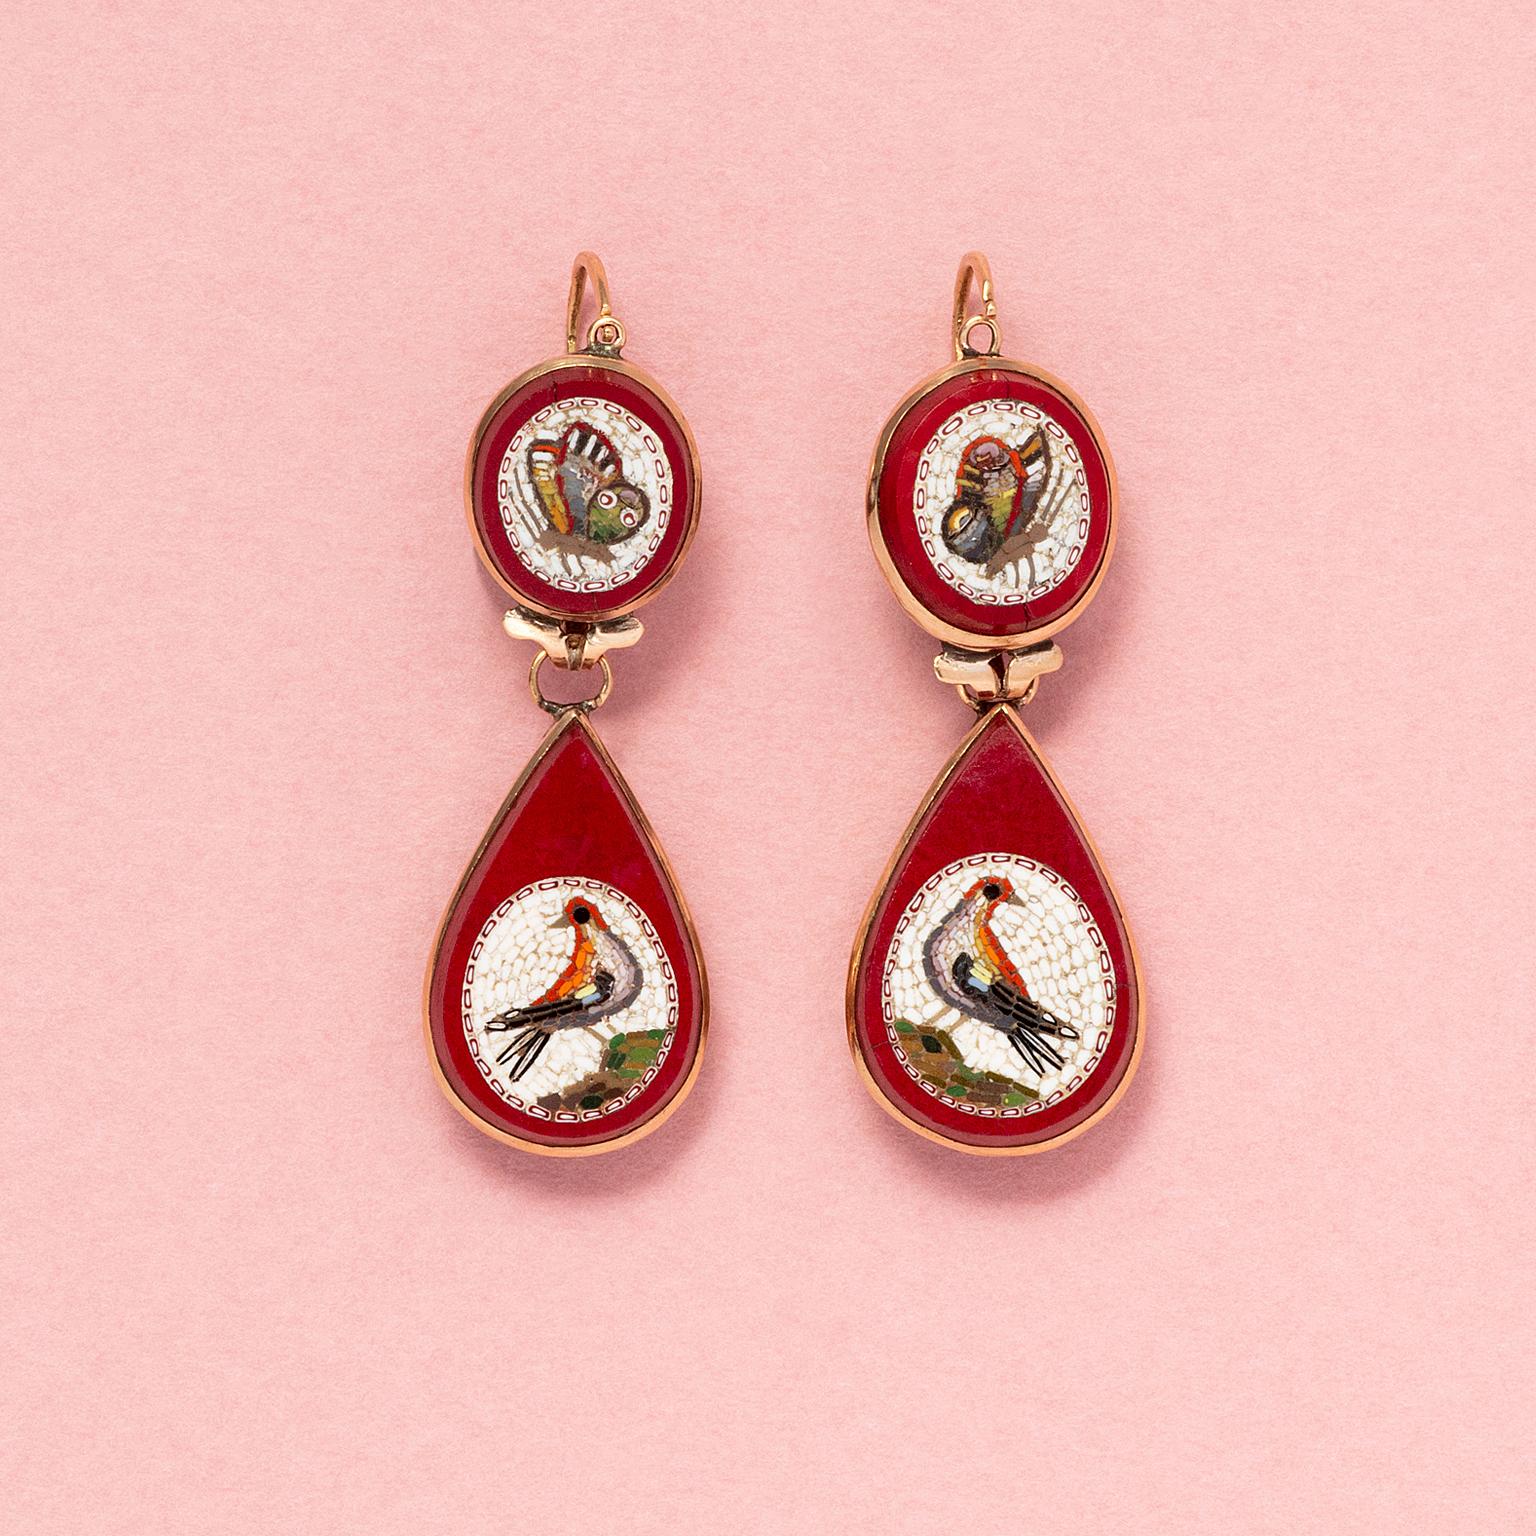 A pair of 18 carat rose gold and micro mosaic earrings, each set with a round plaque with a butterfly on a white background set in red purpurin glass - which imitates obsidian - with a drop shaped red purpurin plaque with a bird on a white